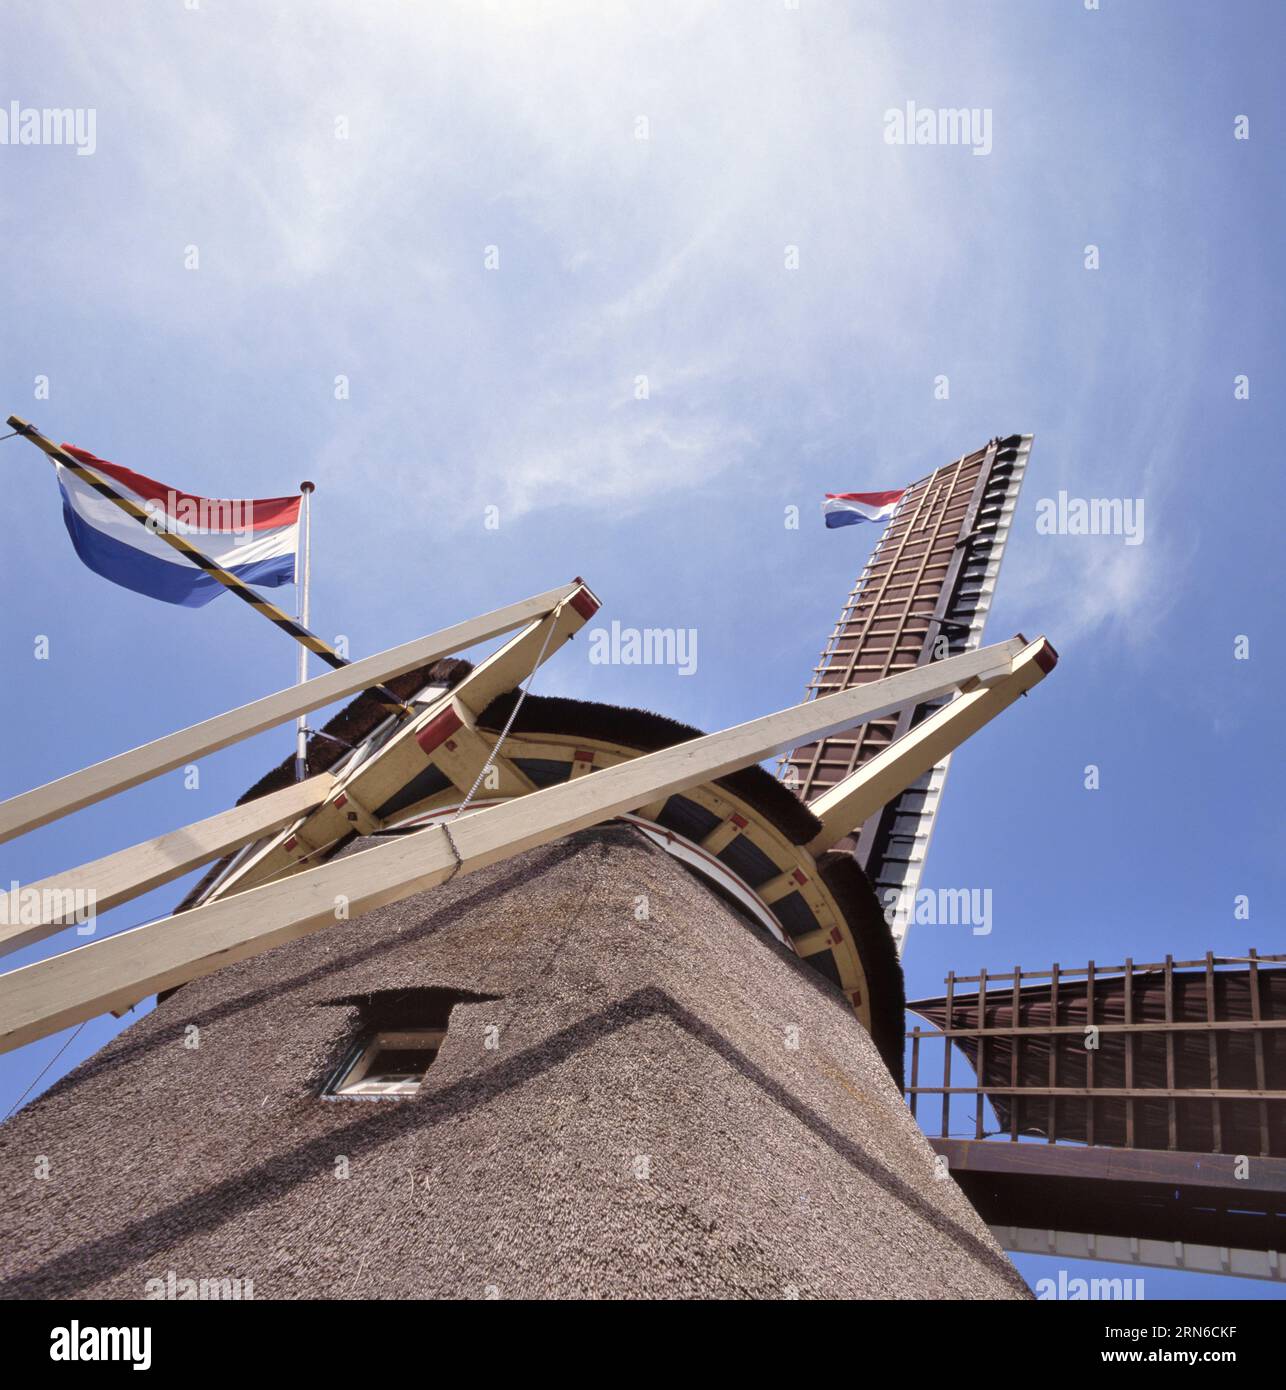 Classic Dutch windmill with two Dutch national flags seen from frog perspective Stock Photo